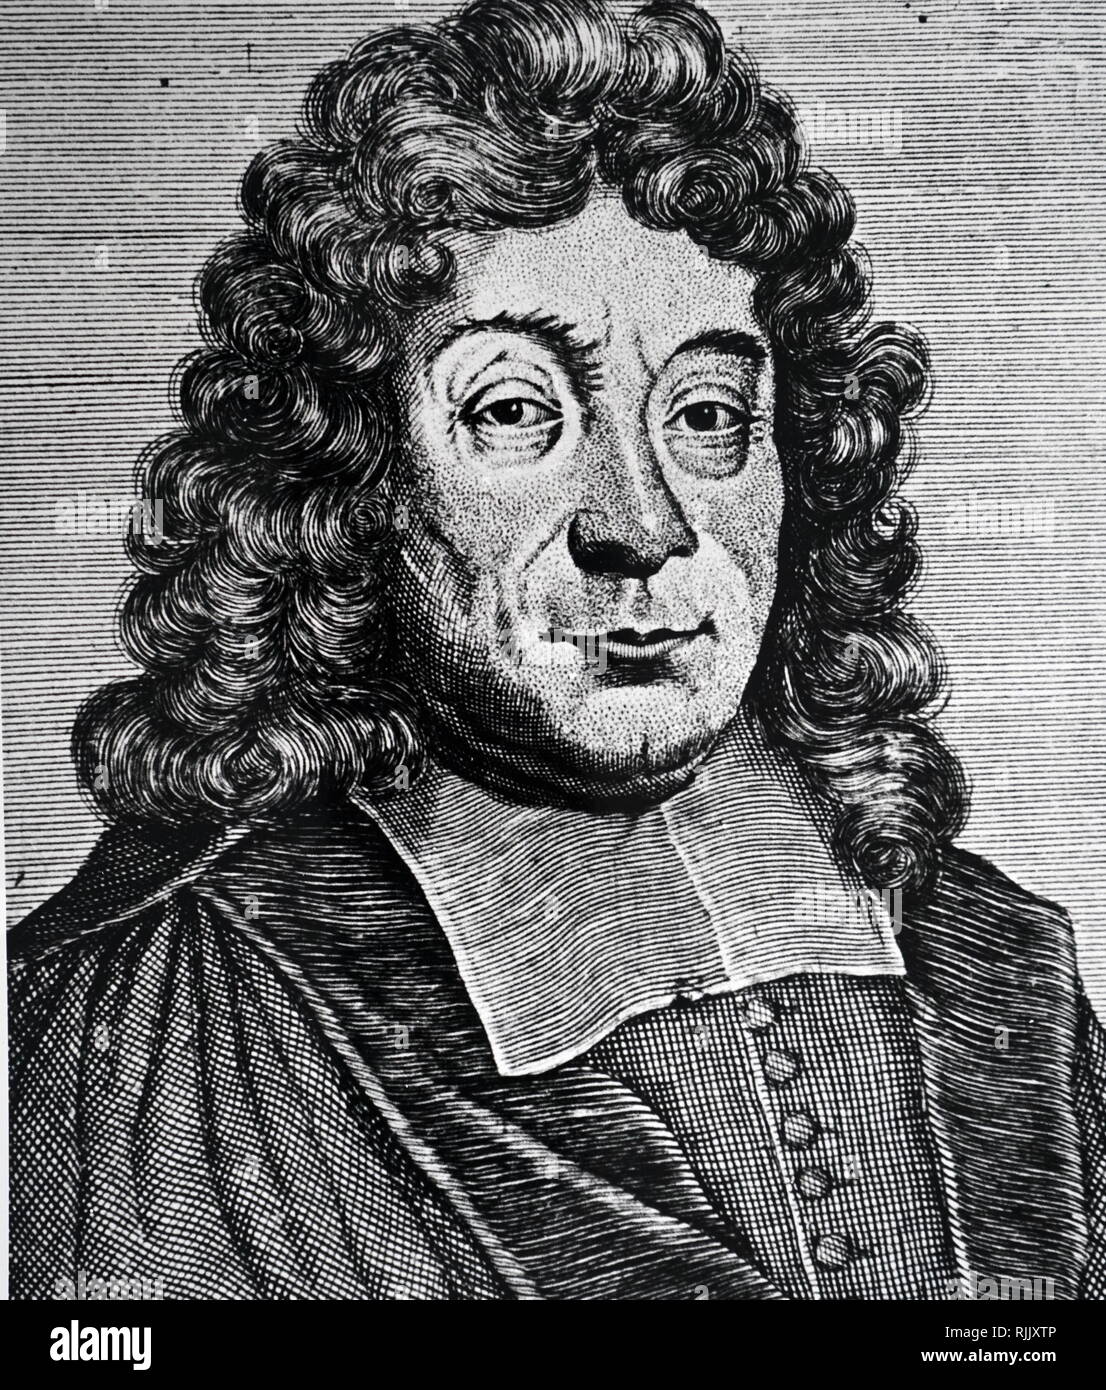 A copperplate engraving depicting Philipp van Limborch (1633-1712) a Dutch Remonstrant theologian. Dated 18th century Stock Photo